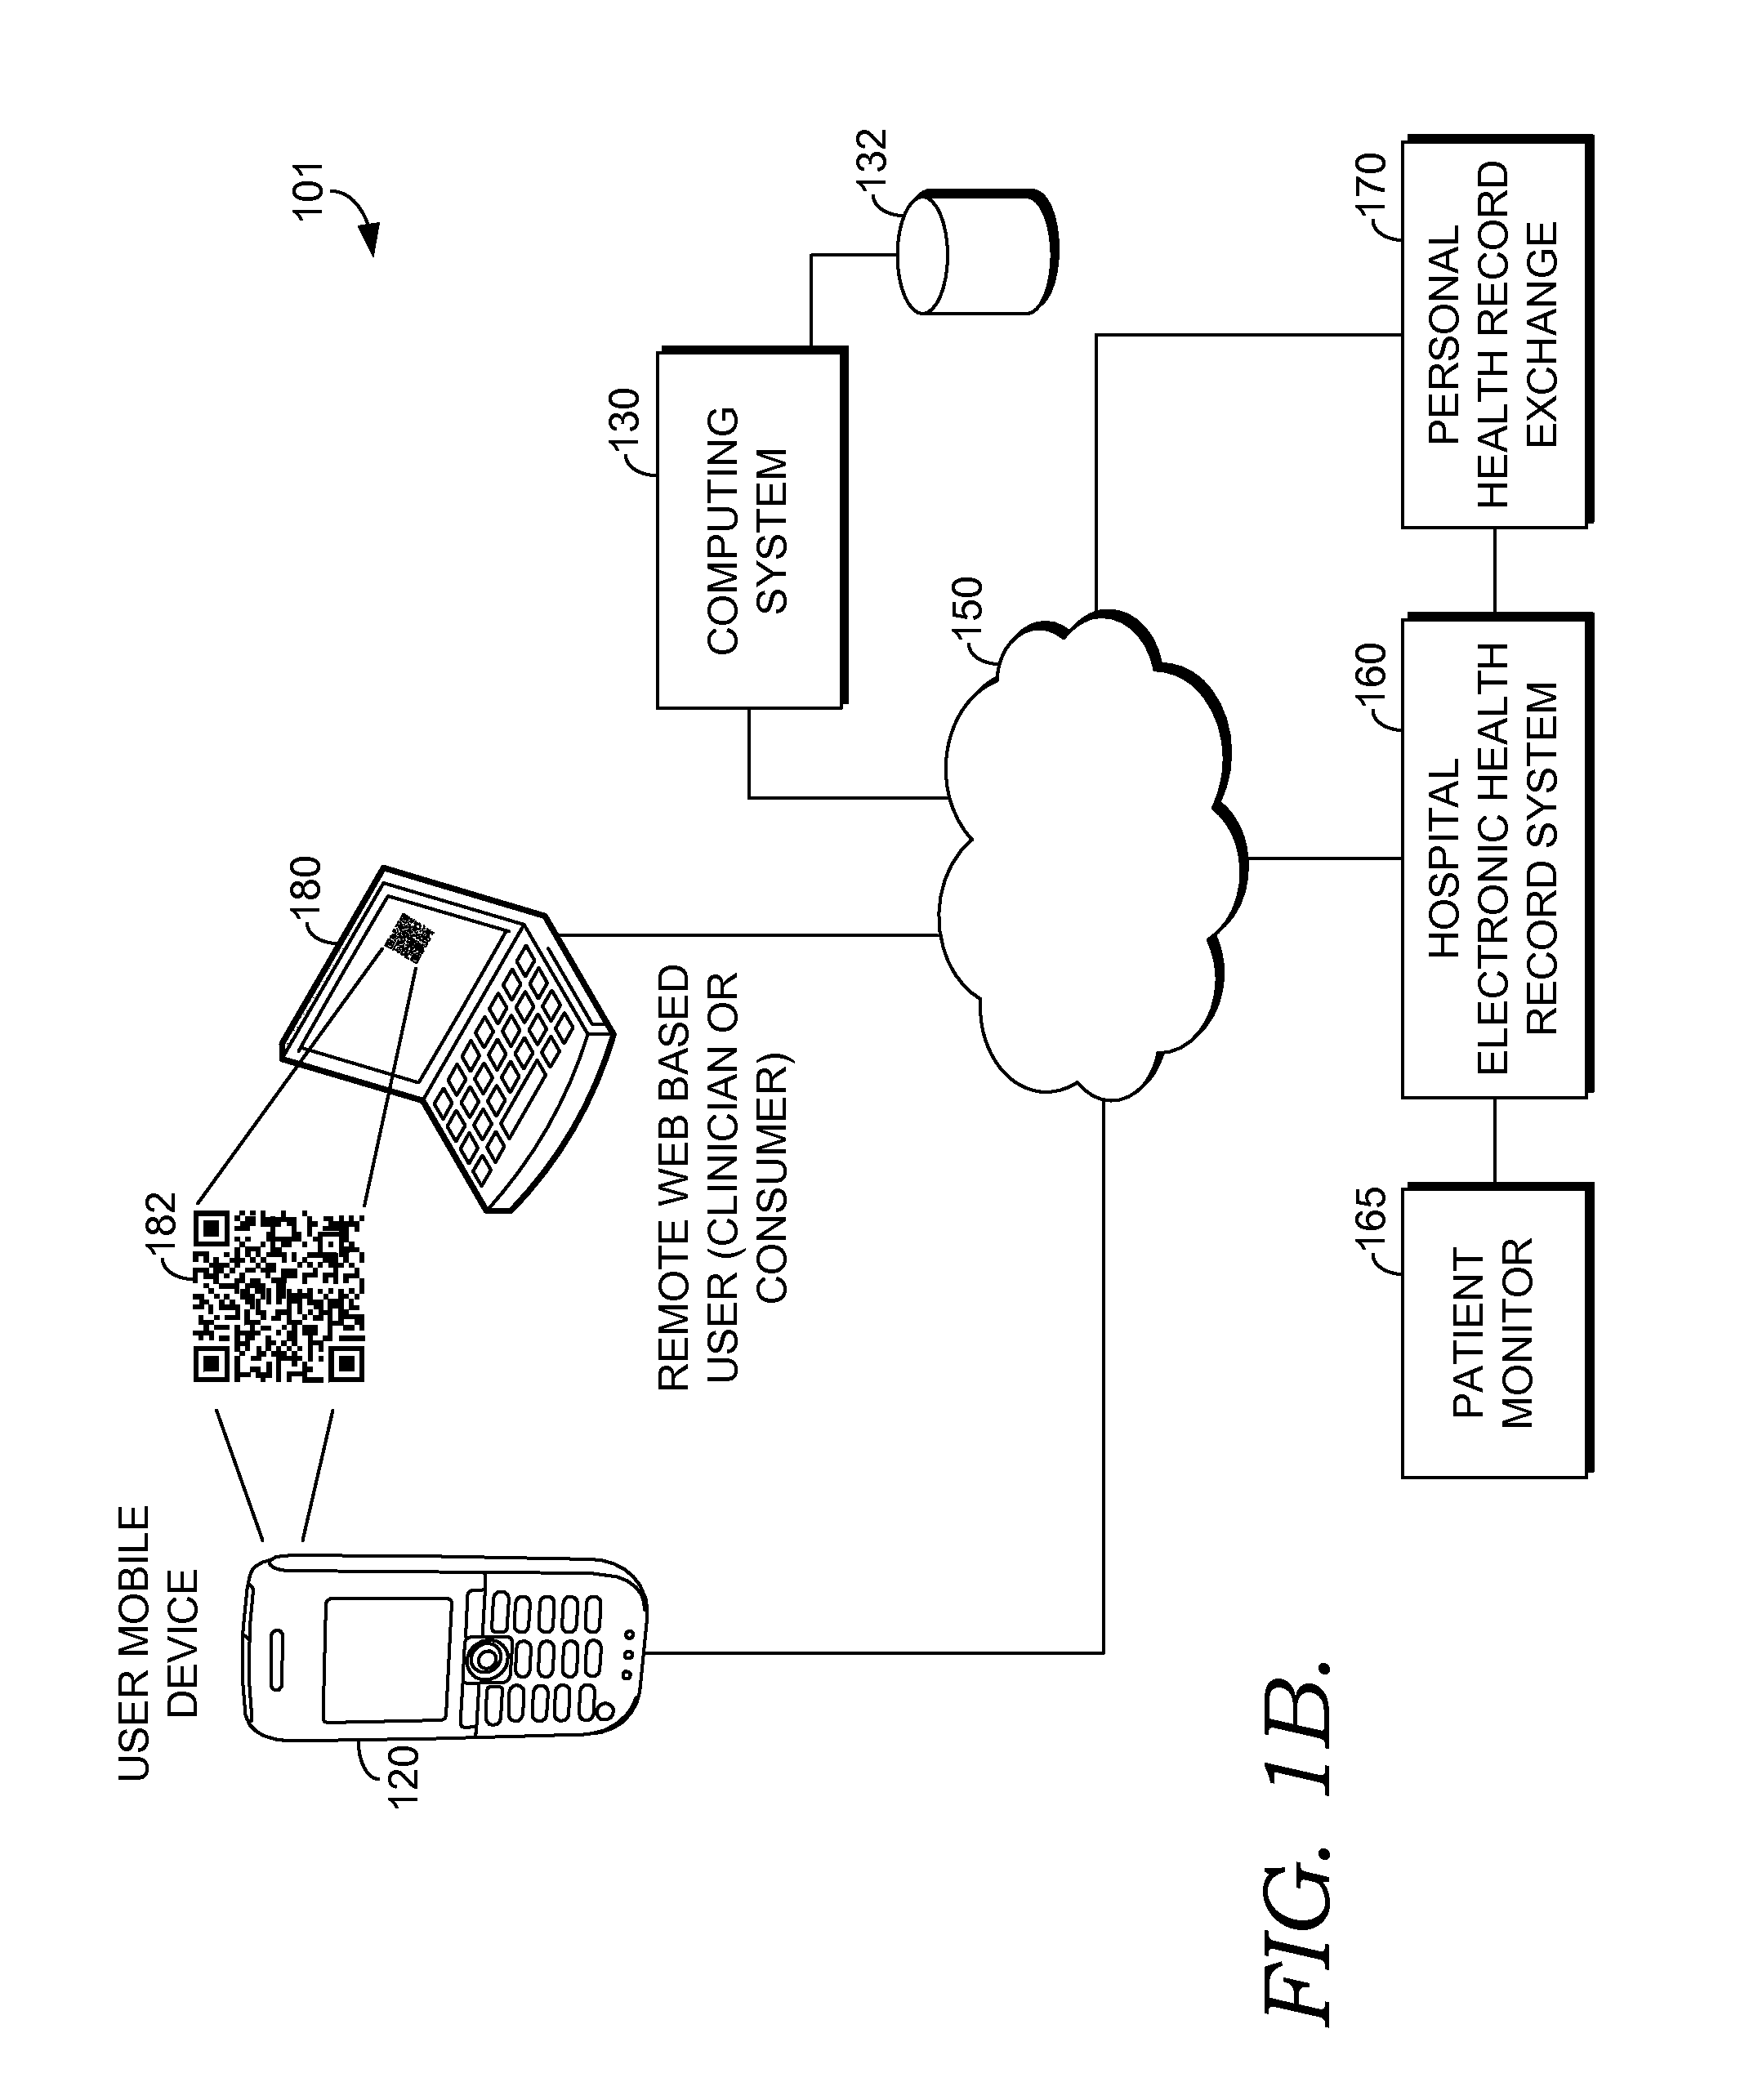 Computerized systems and methods for providing mobile-device updates of electronic health records